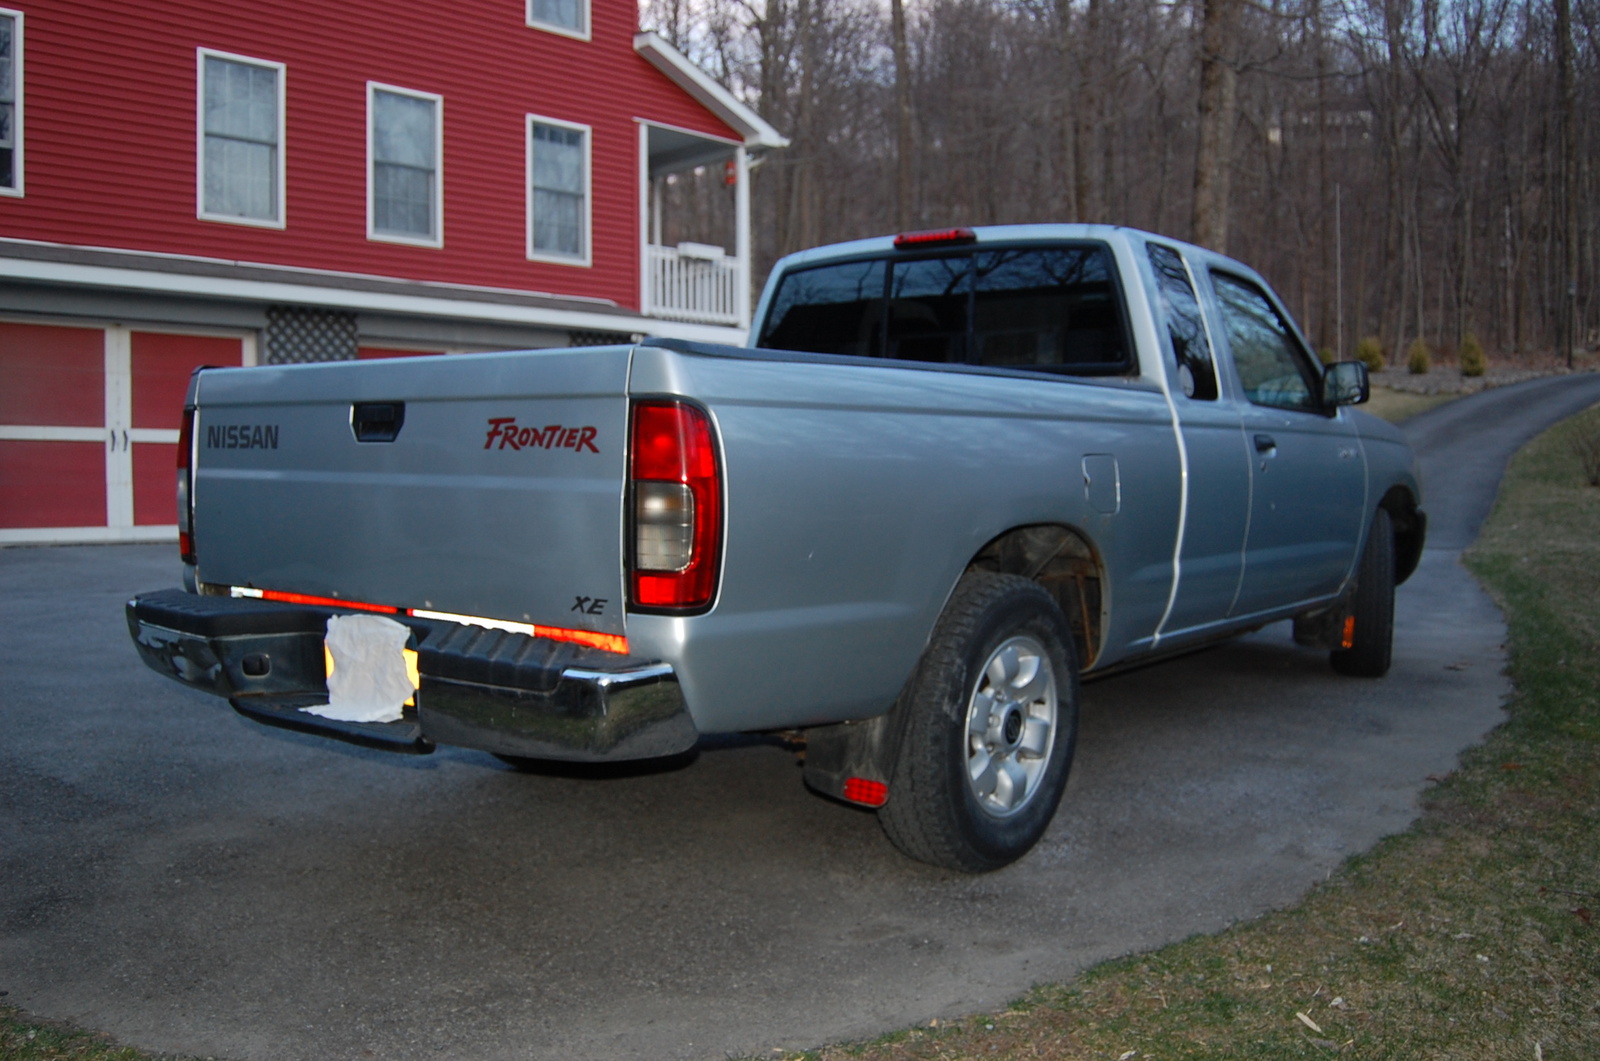 2000 Nissan frontier xe extended cab #2